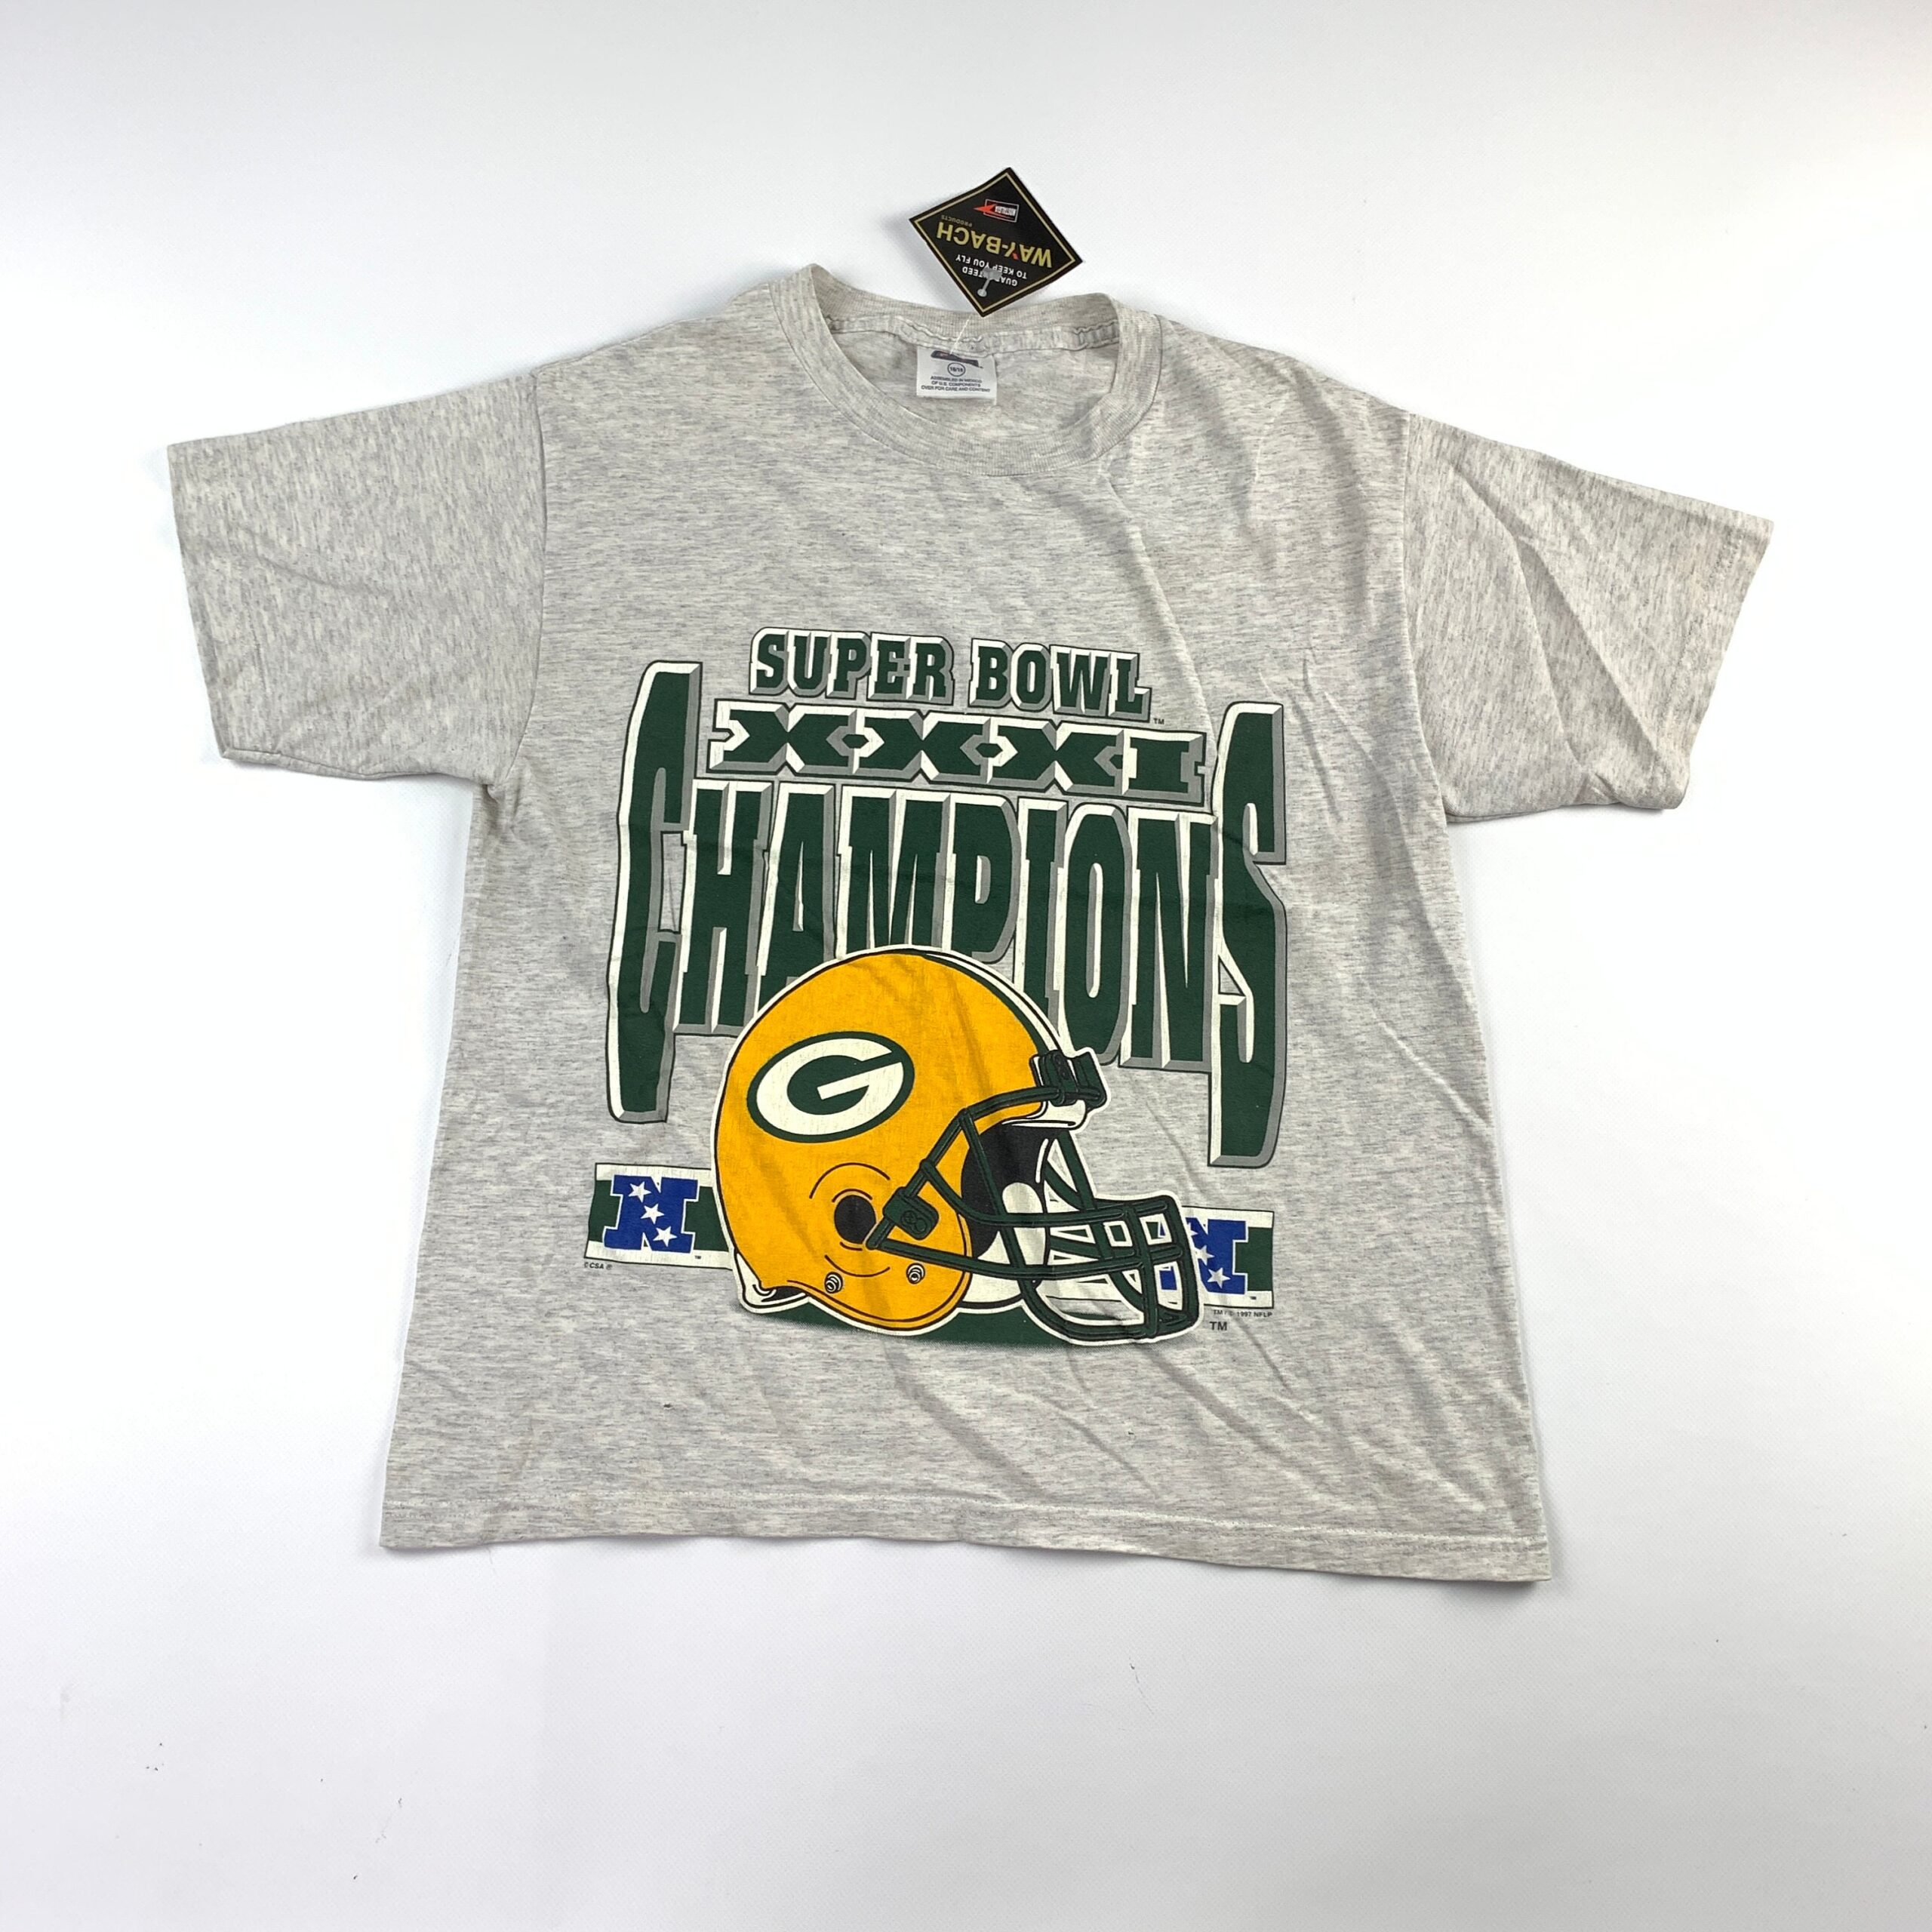 Vintage 1997 NFL Green Bay Packers Super Bowl Champions Nfc North Shirt